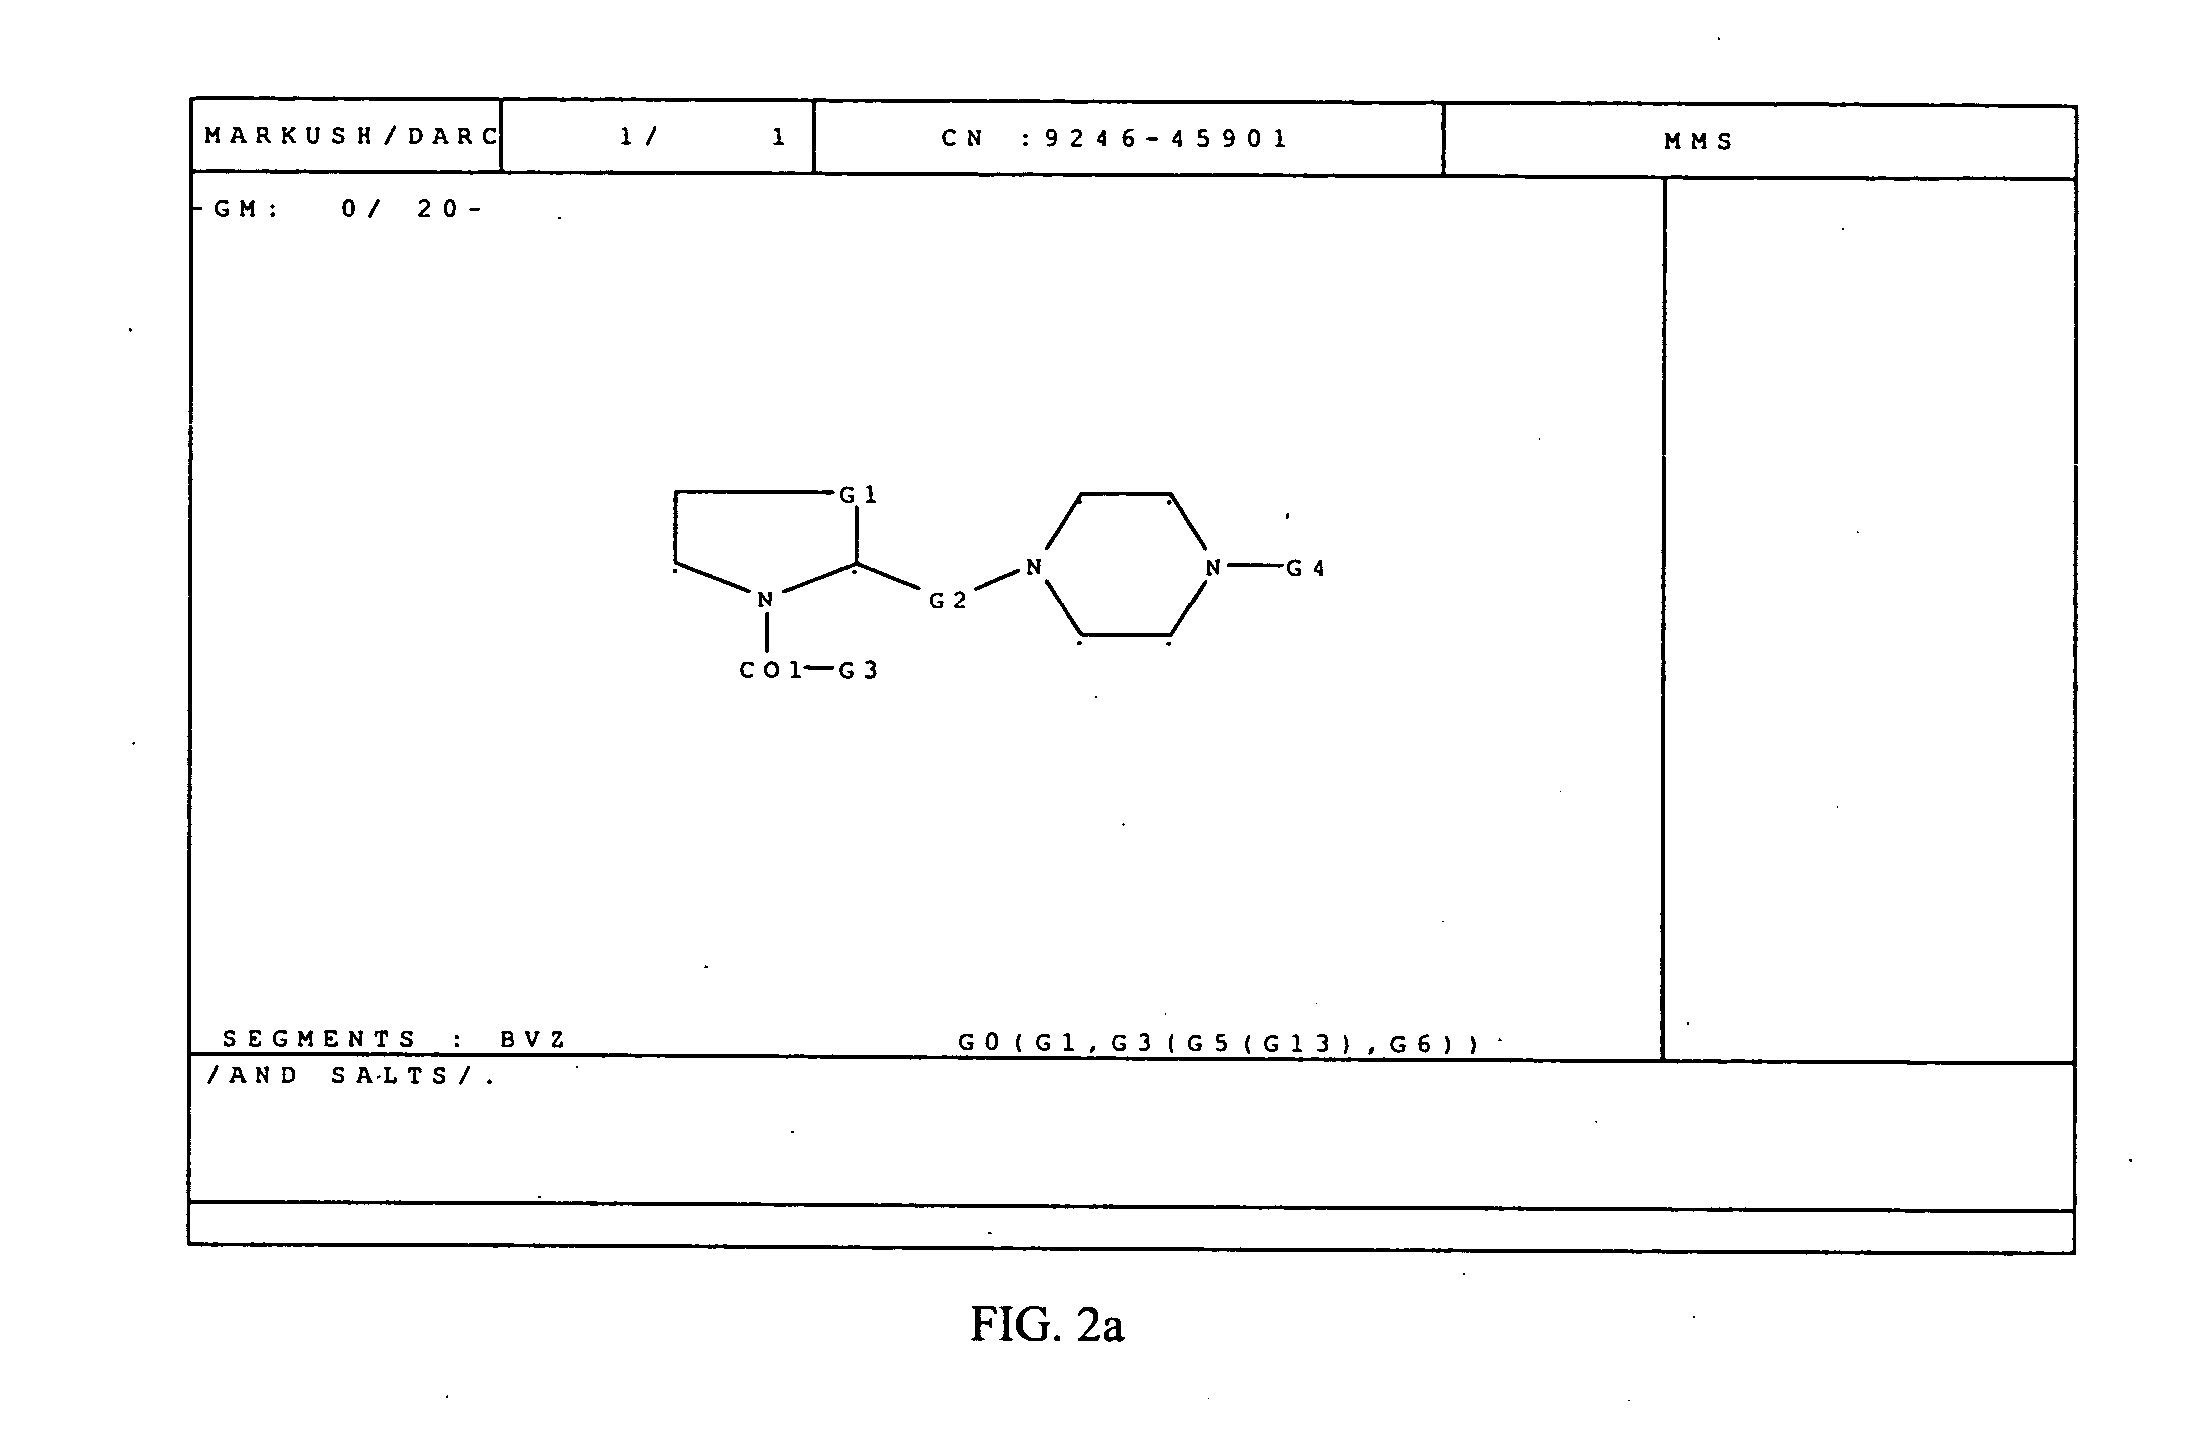 Display for Markush chemical structures